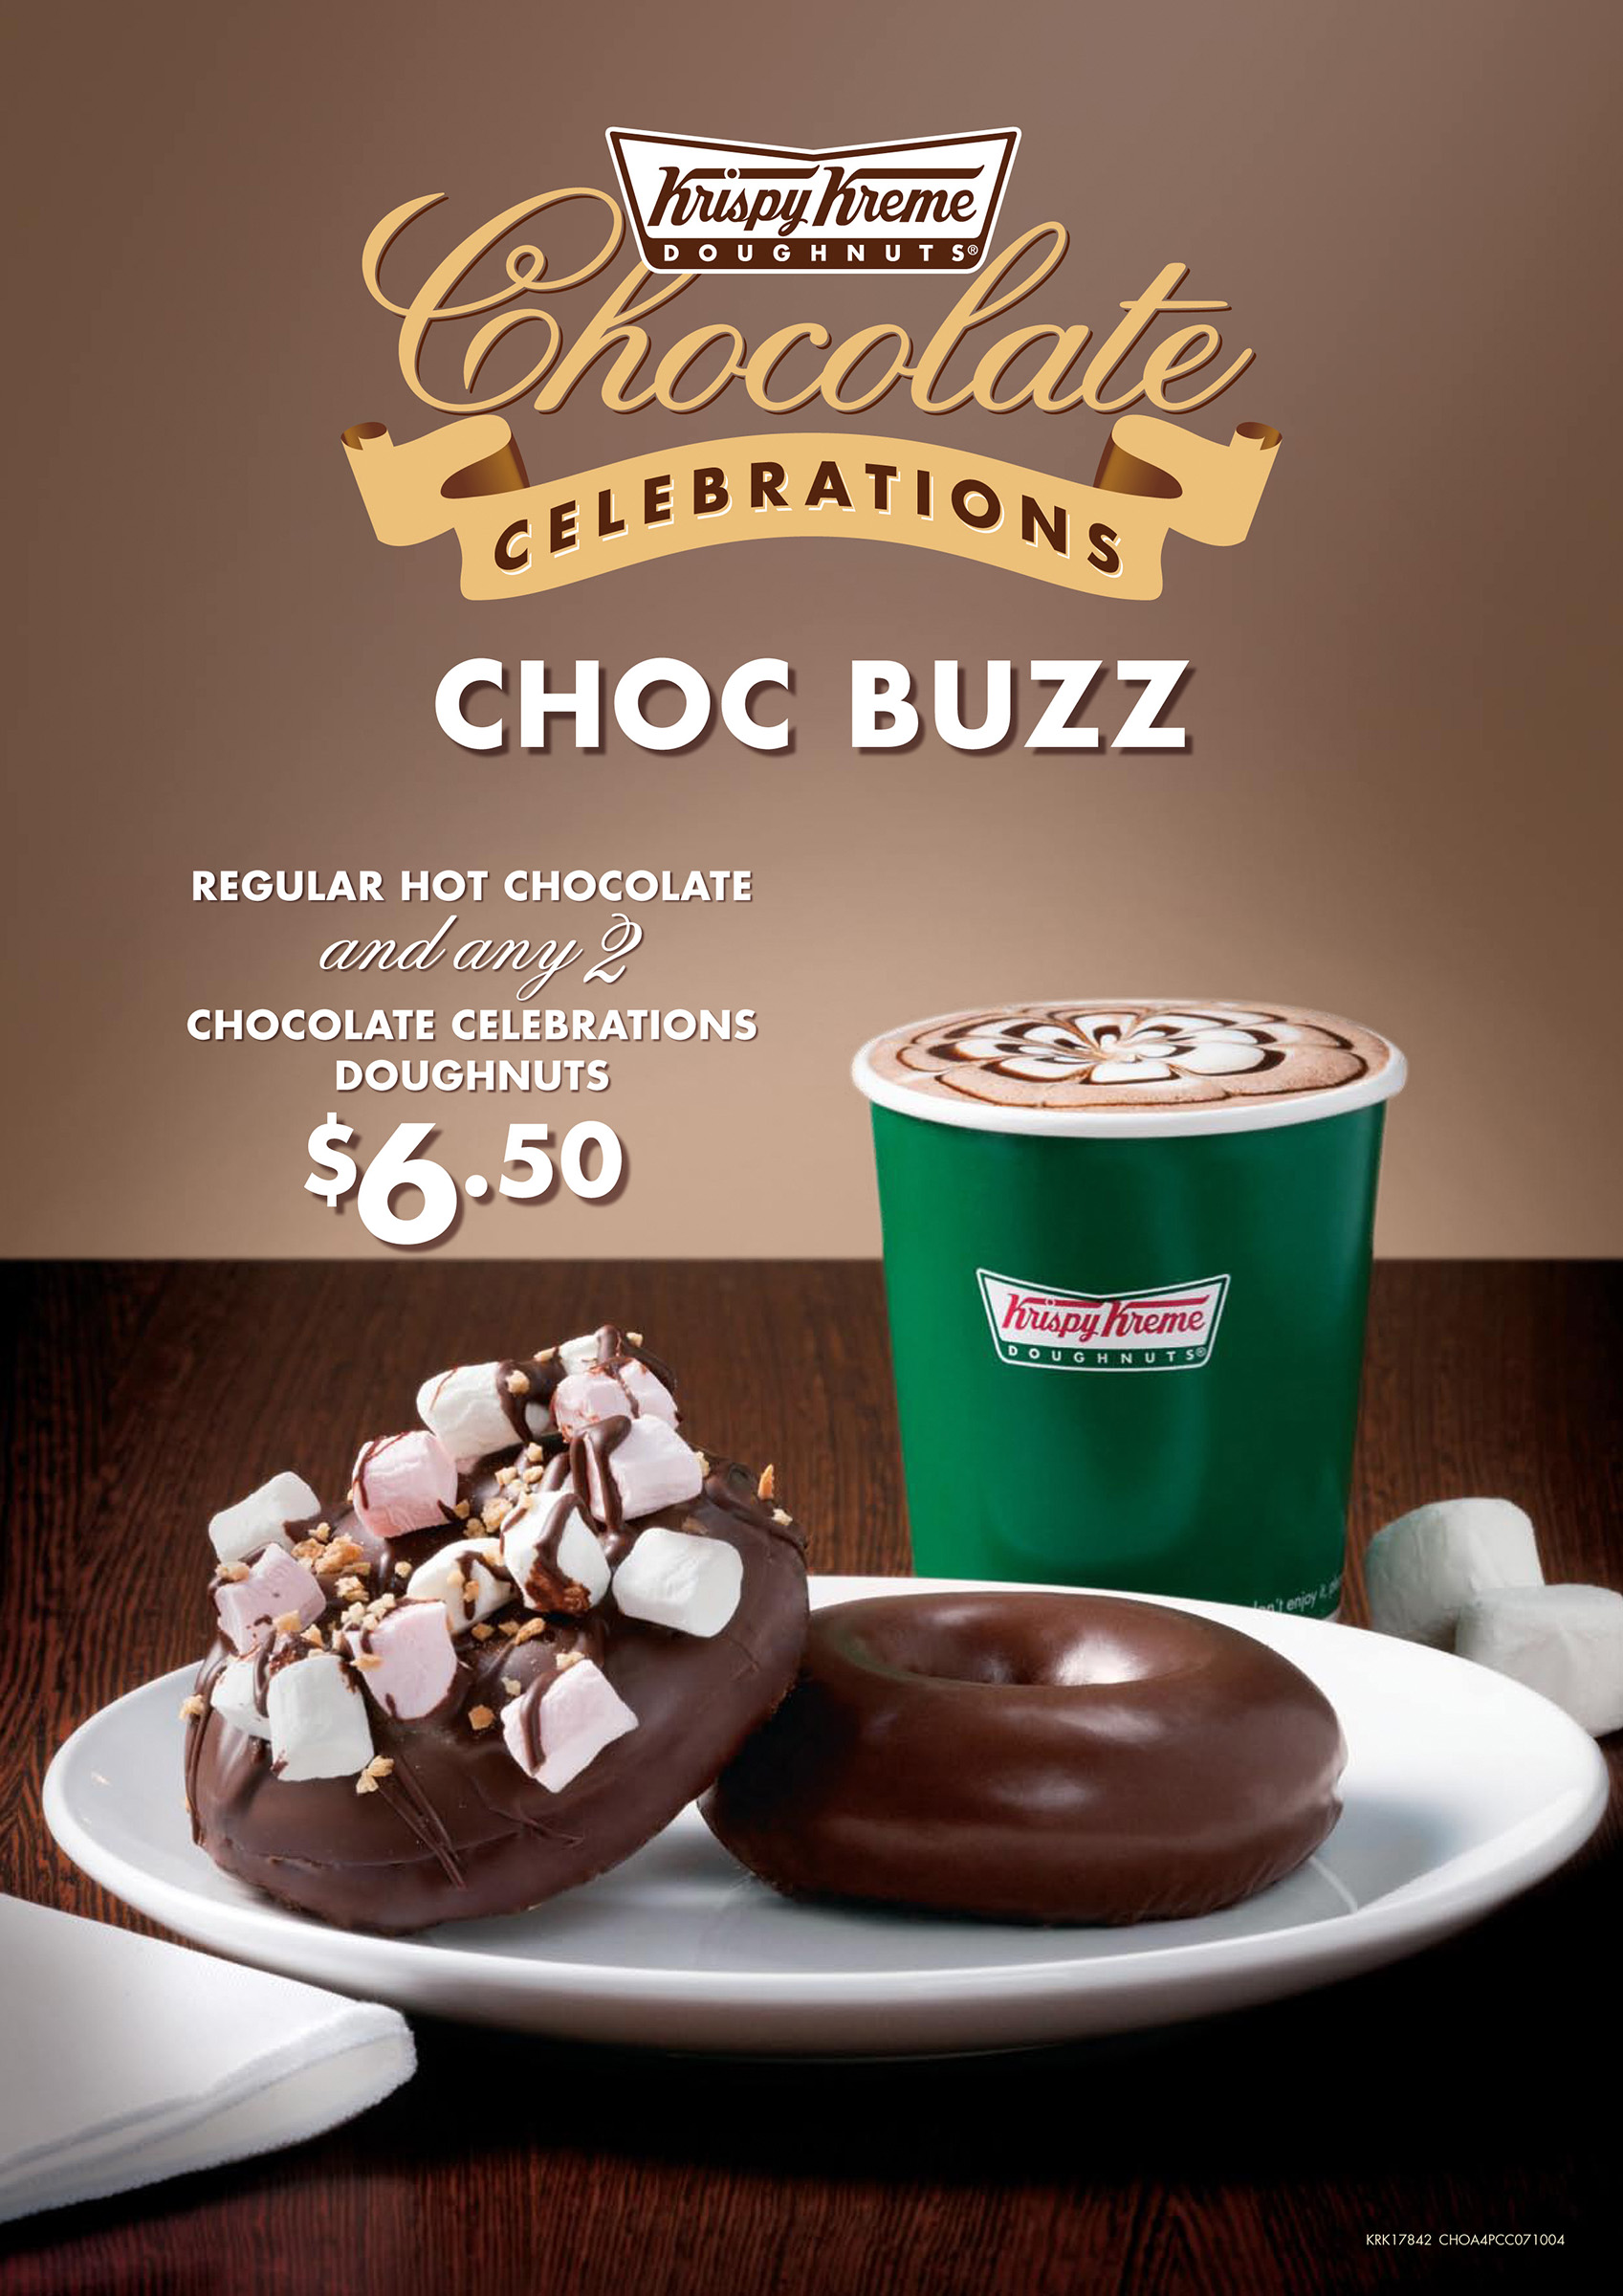 Advertising photography of Krispy Kreme doughnuts covered in chocolate marshmallows on a plate with a hot chocolate